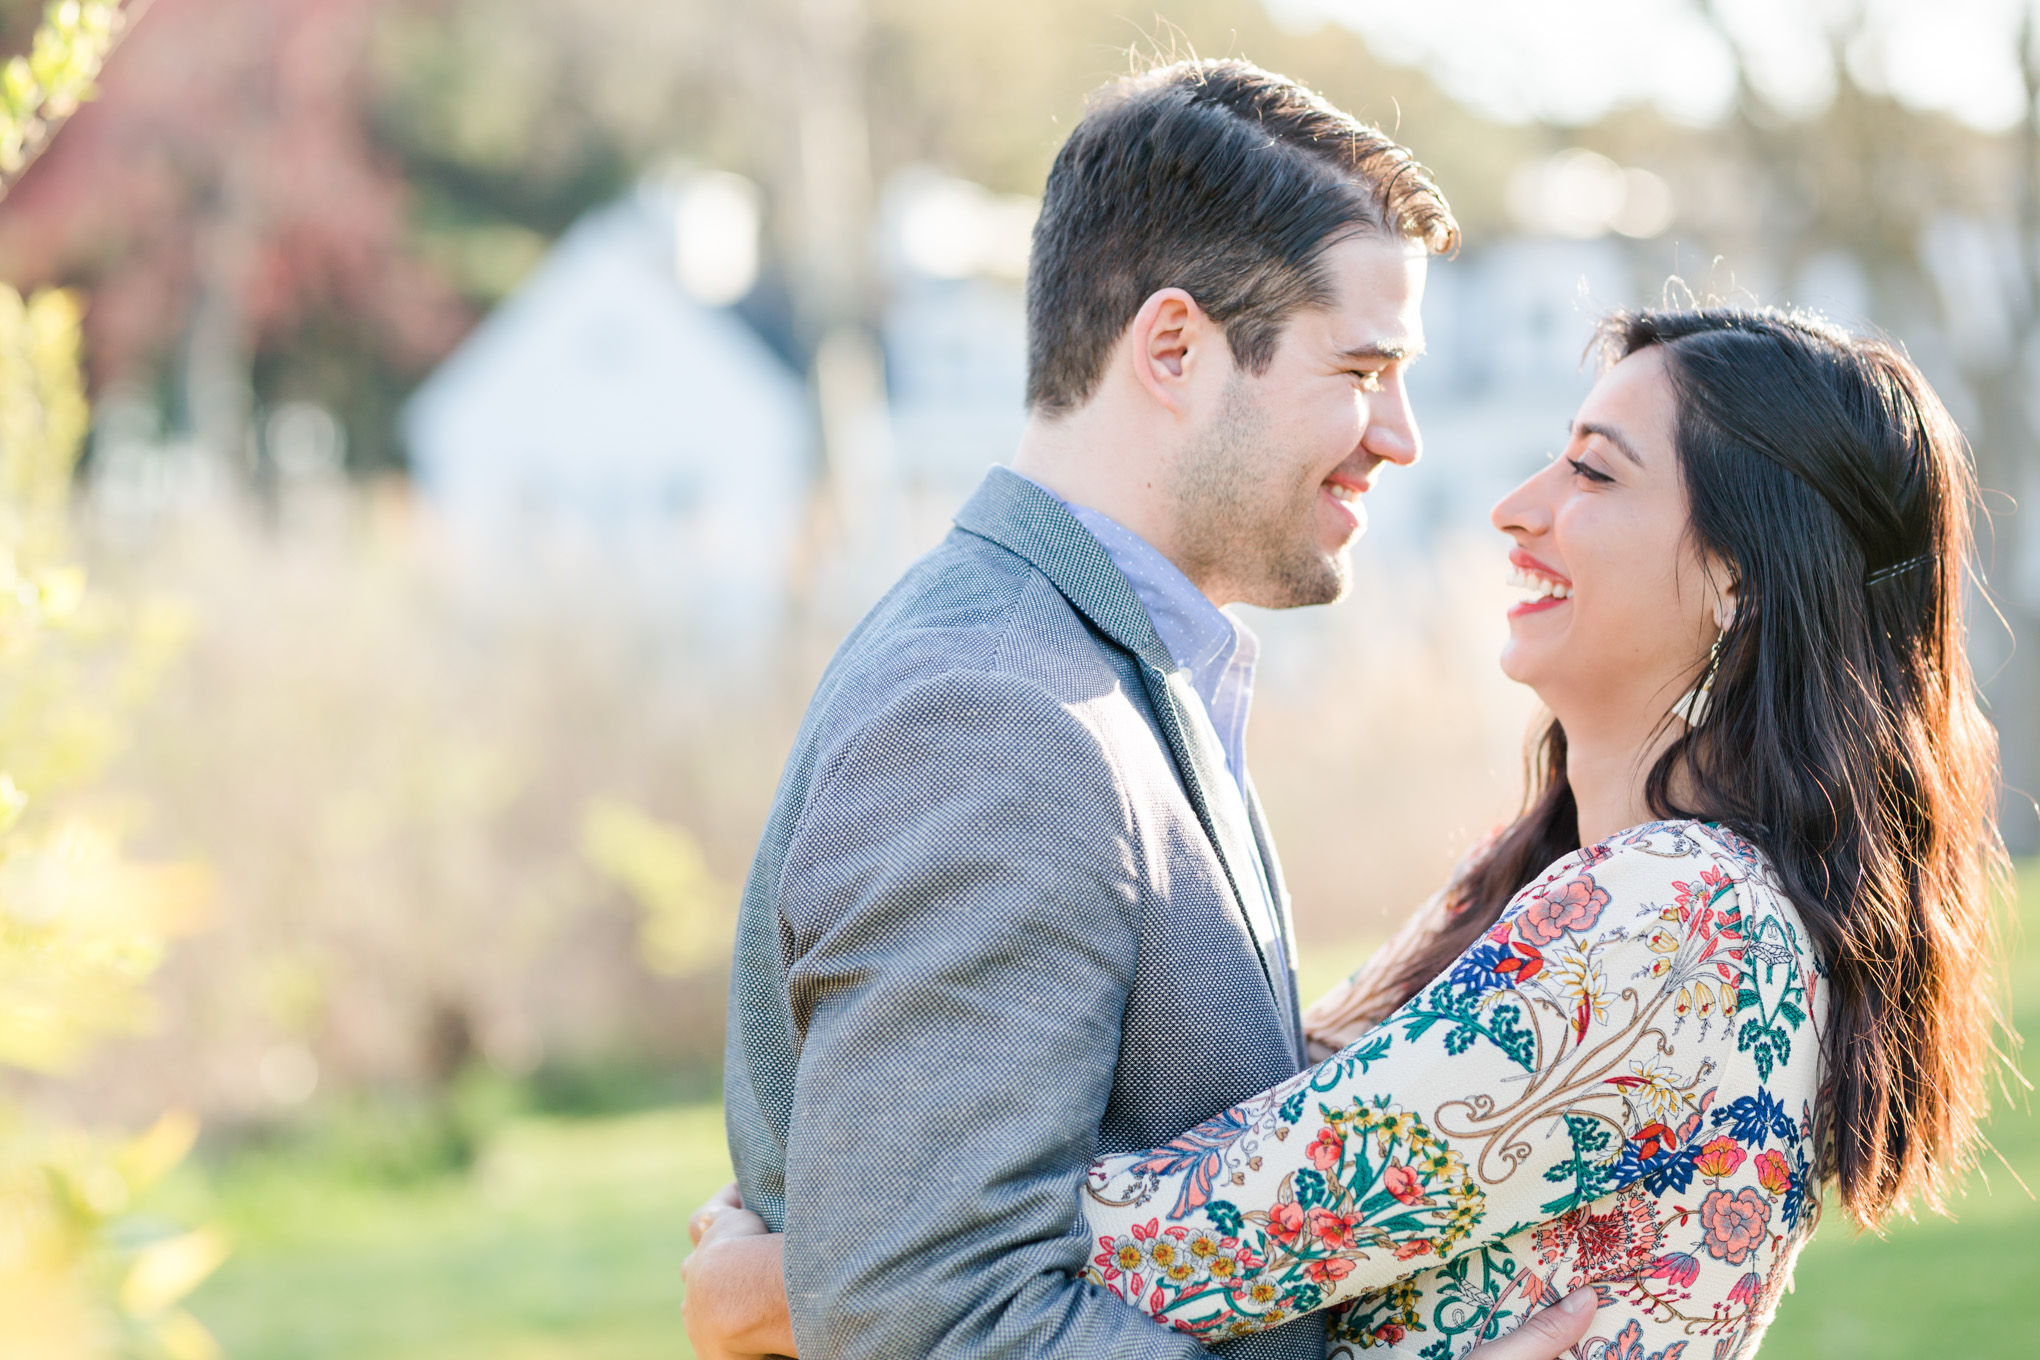 Inn at Perry Cabin, waterfront proposal, surprise proposal, marriage proposal, Maryland waterfront, Maryland eastern shore, spring marriage proposal, floral dress, grey blazer, St. Michaels, relationship goals, happy couple, laughing couple, St. Michaels surprise proposal